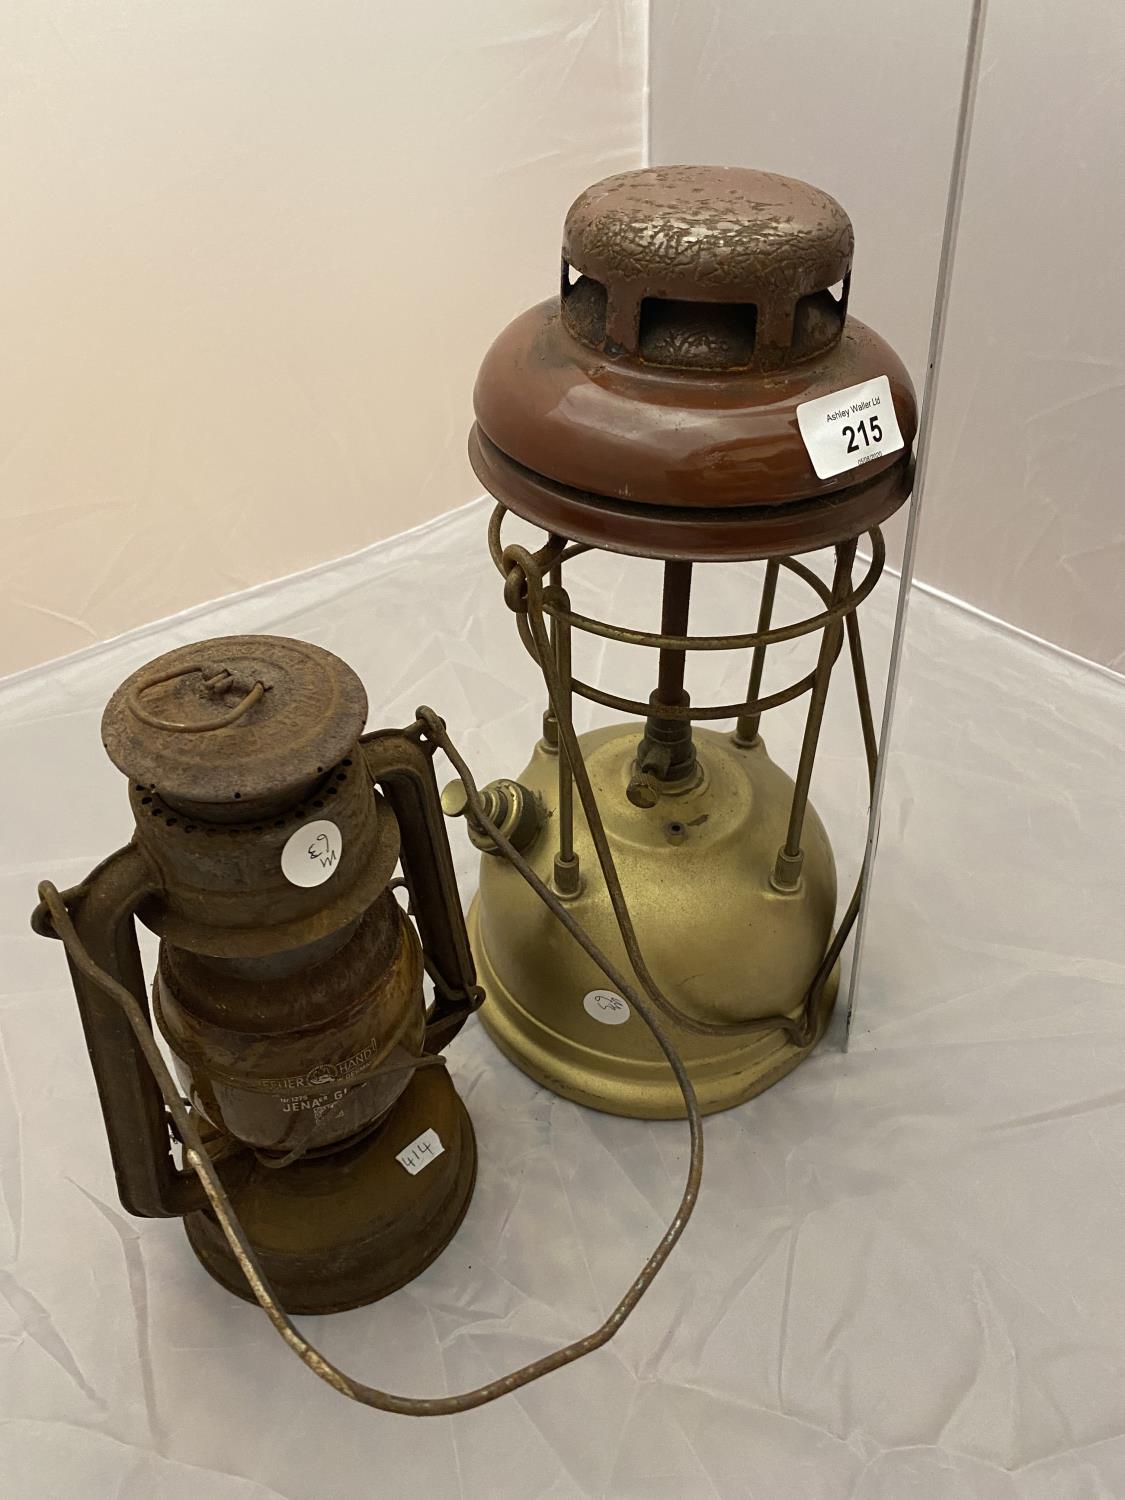 A TILLY LAMP AND GERMAN STORM LAMP - Image 2 of 2